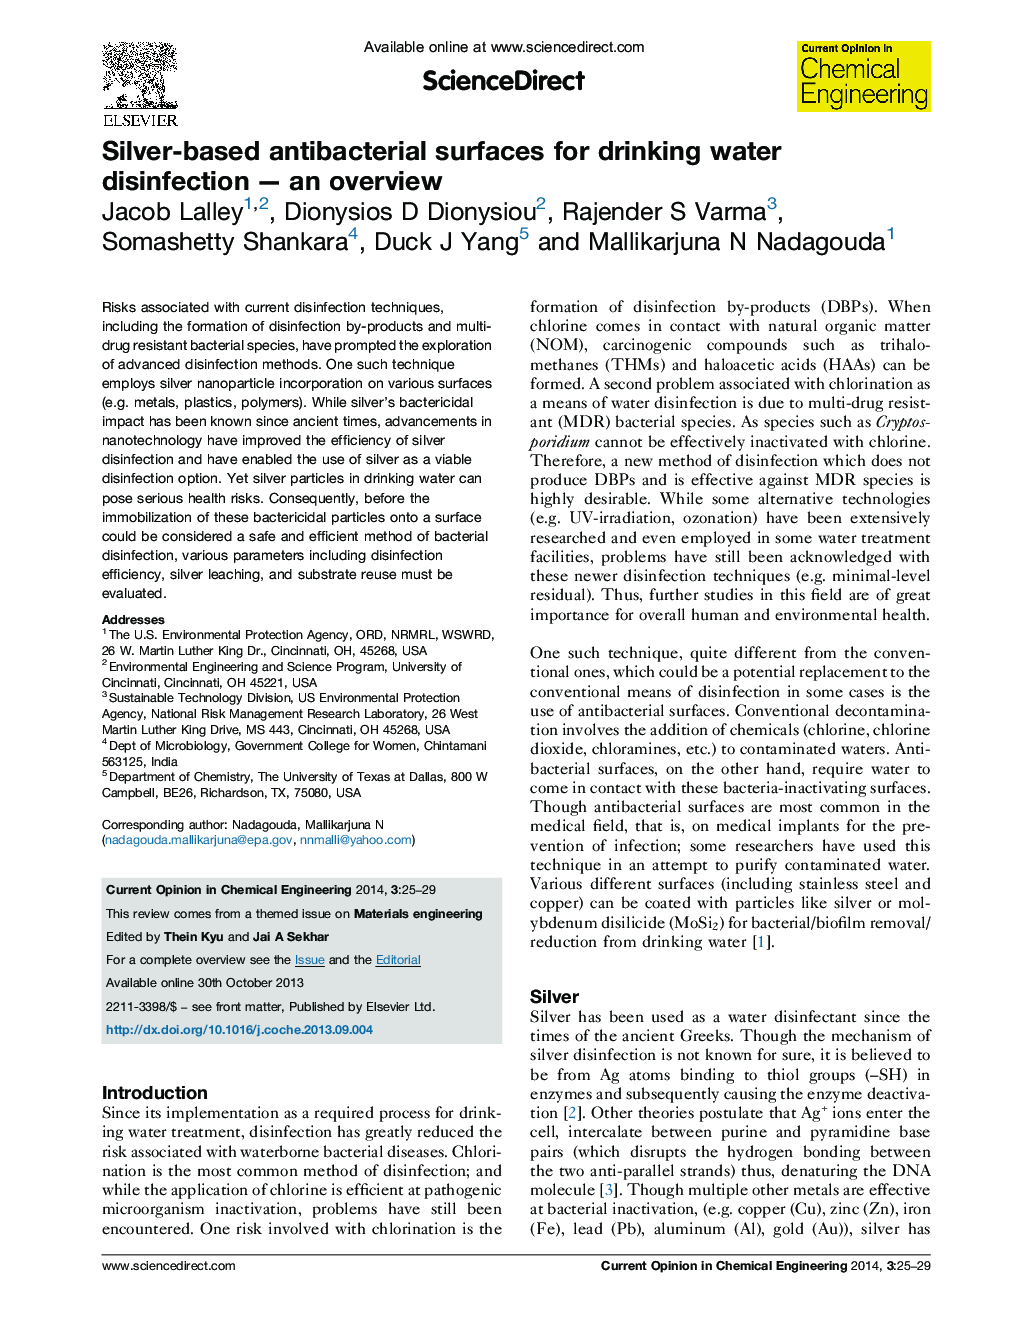 Silver-based antibacterial surfaces for drinking water disinfection — an overview